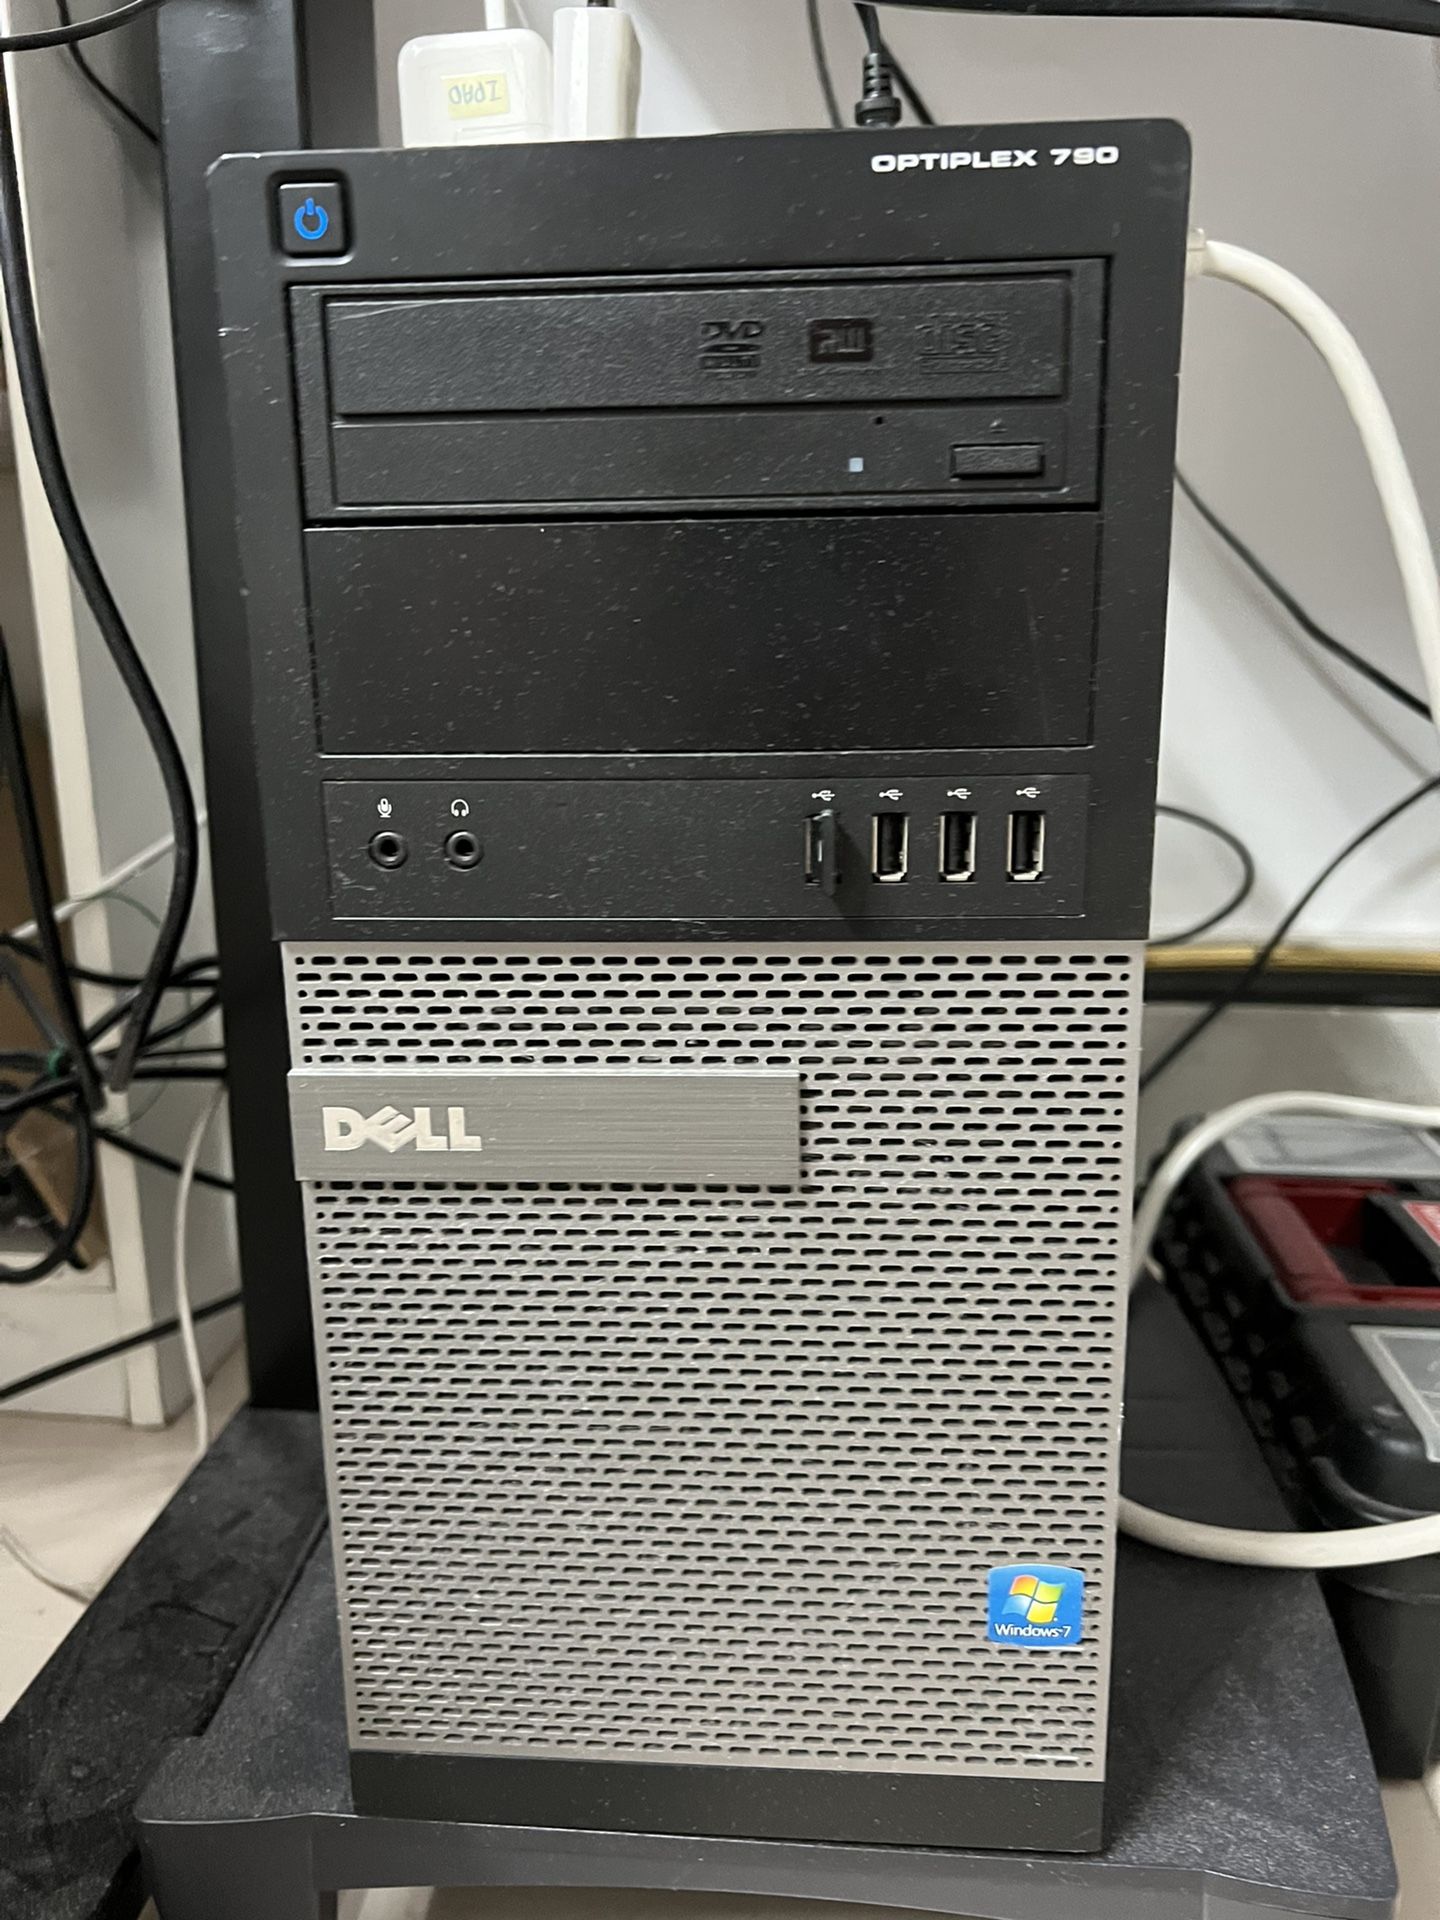 Dell Optiplex 790 Full Tower (Good Condition) Support Dual Monitors